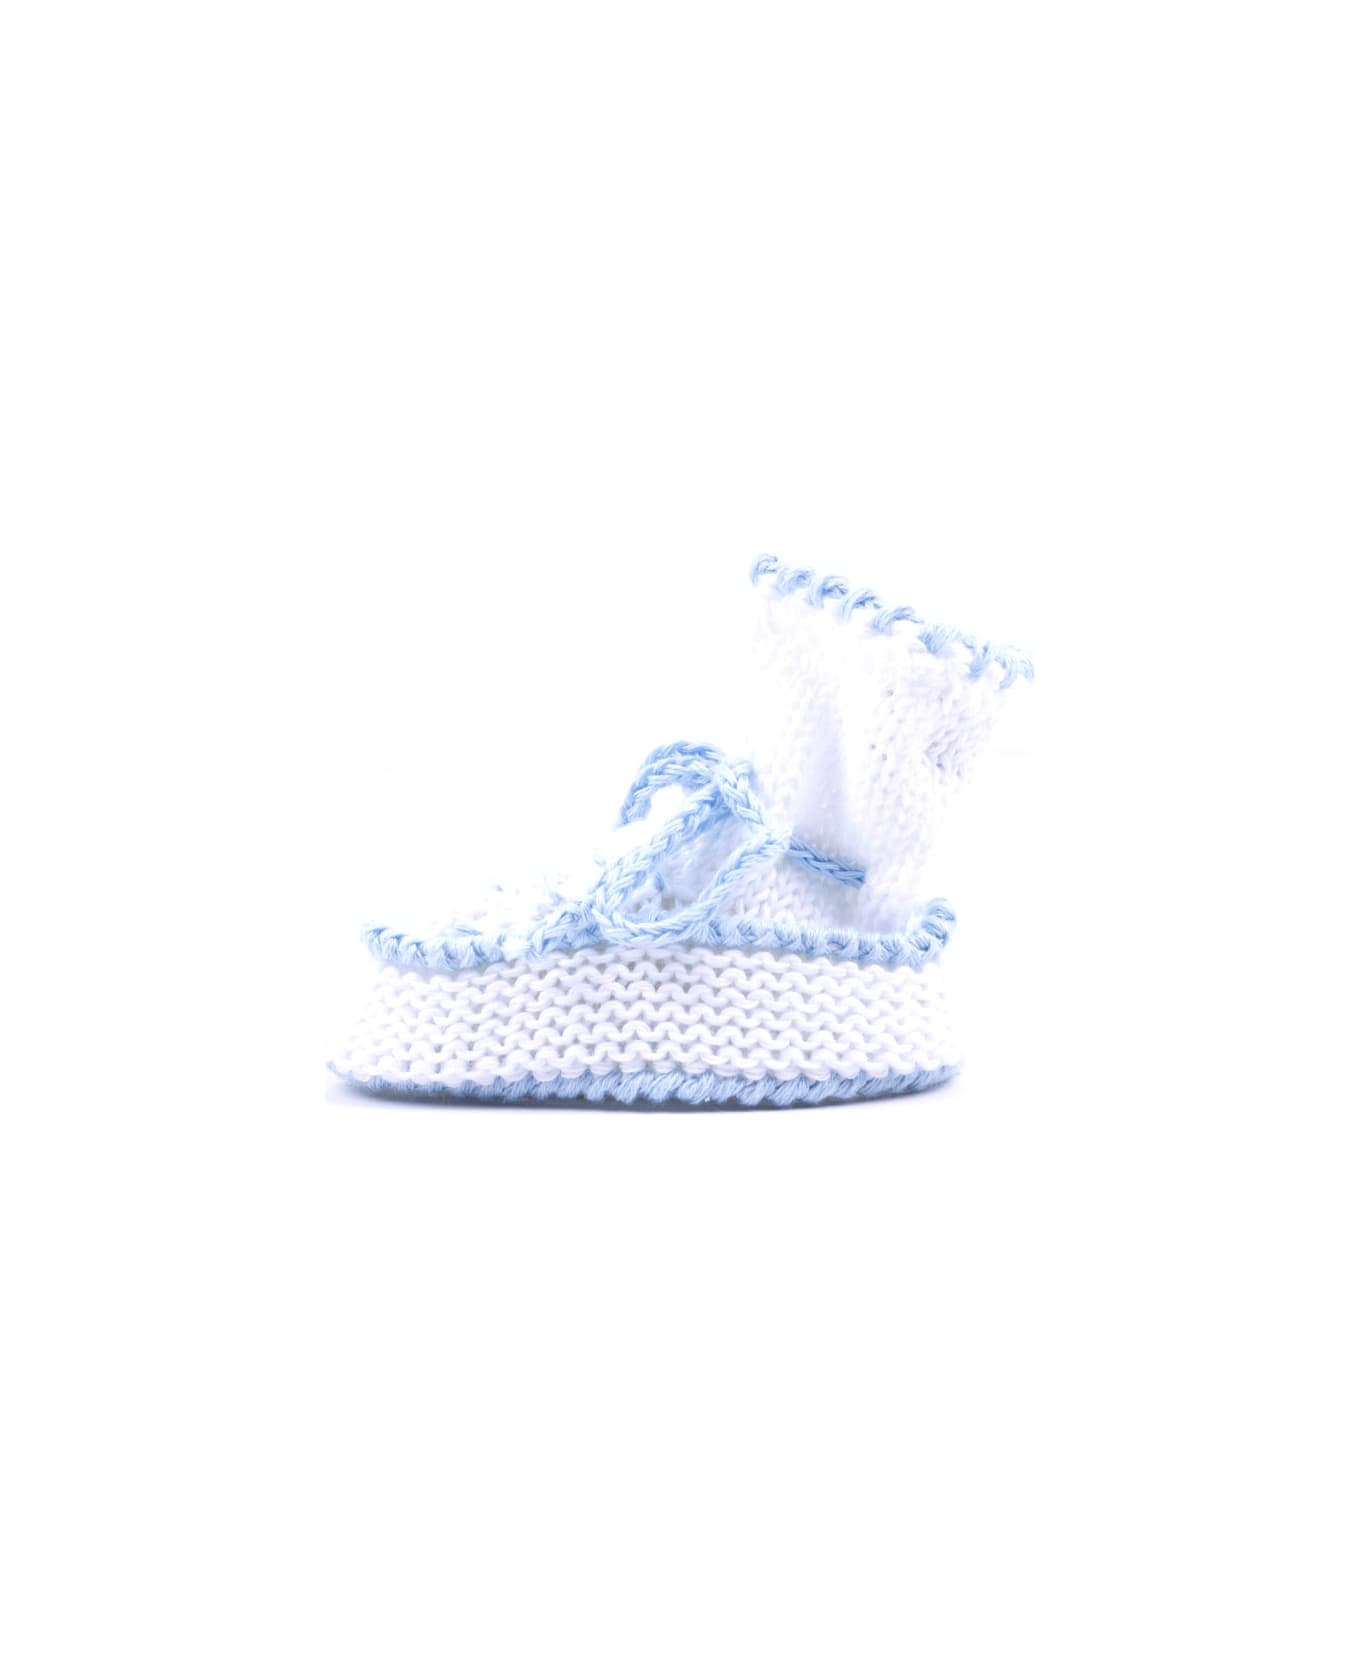 Piccola Giuggiola Cotton Knit Shoes - White アクセサリー＆ギフト